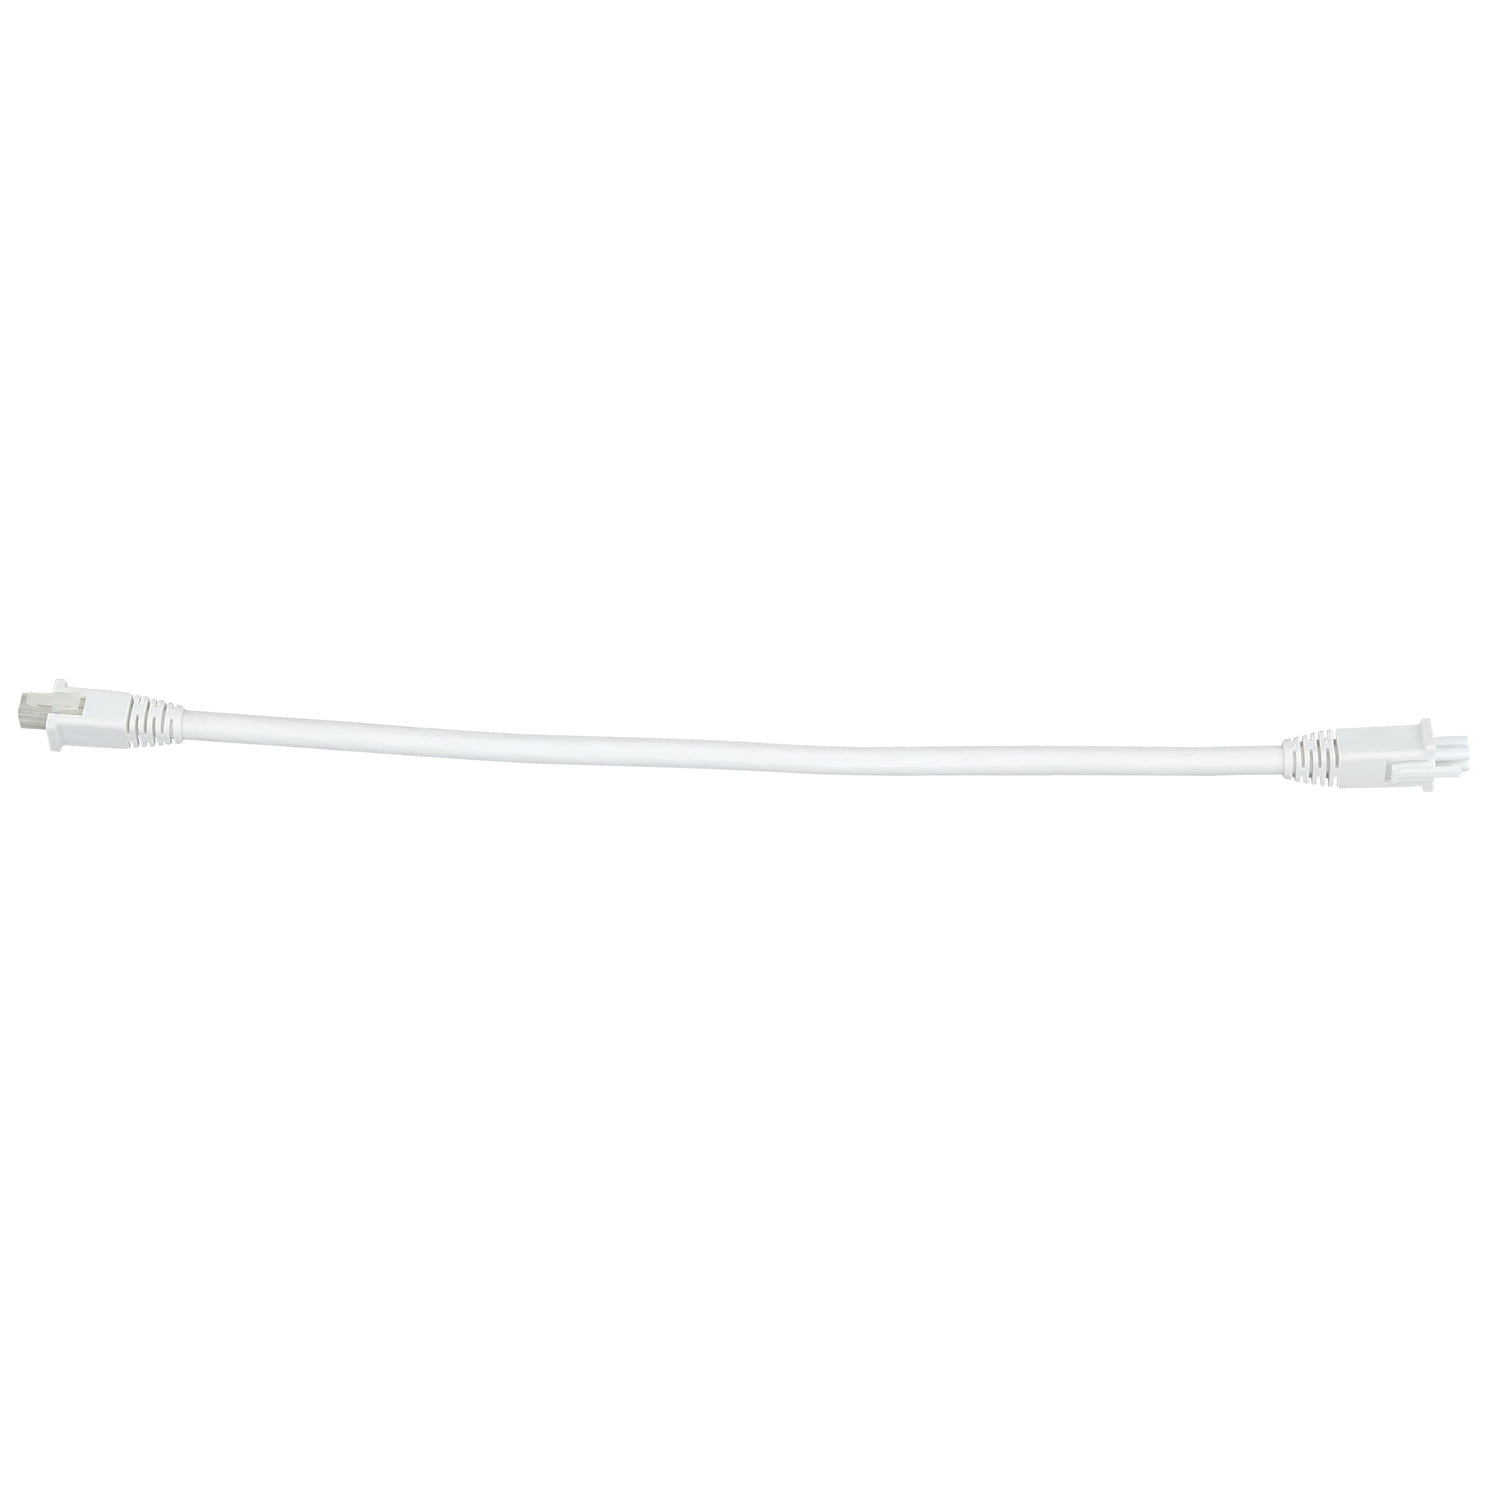 GE Basic Plug-In 18 Inch Fluorescent Light Fixture Warm White On/Off Switch 